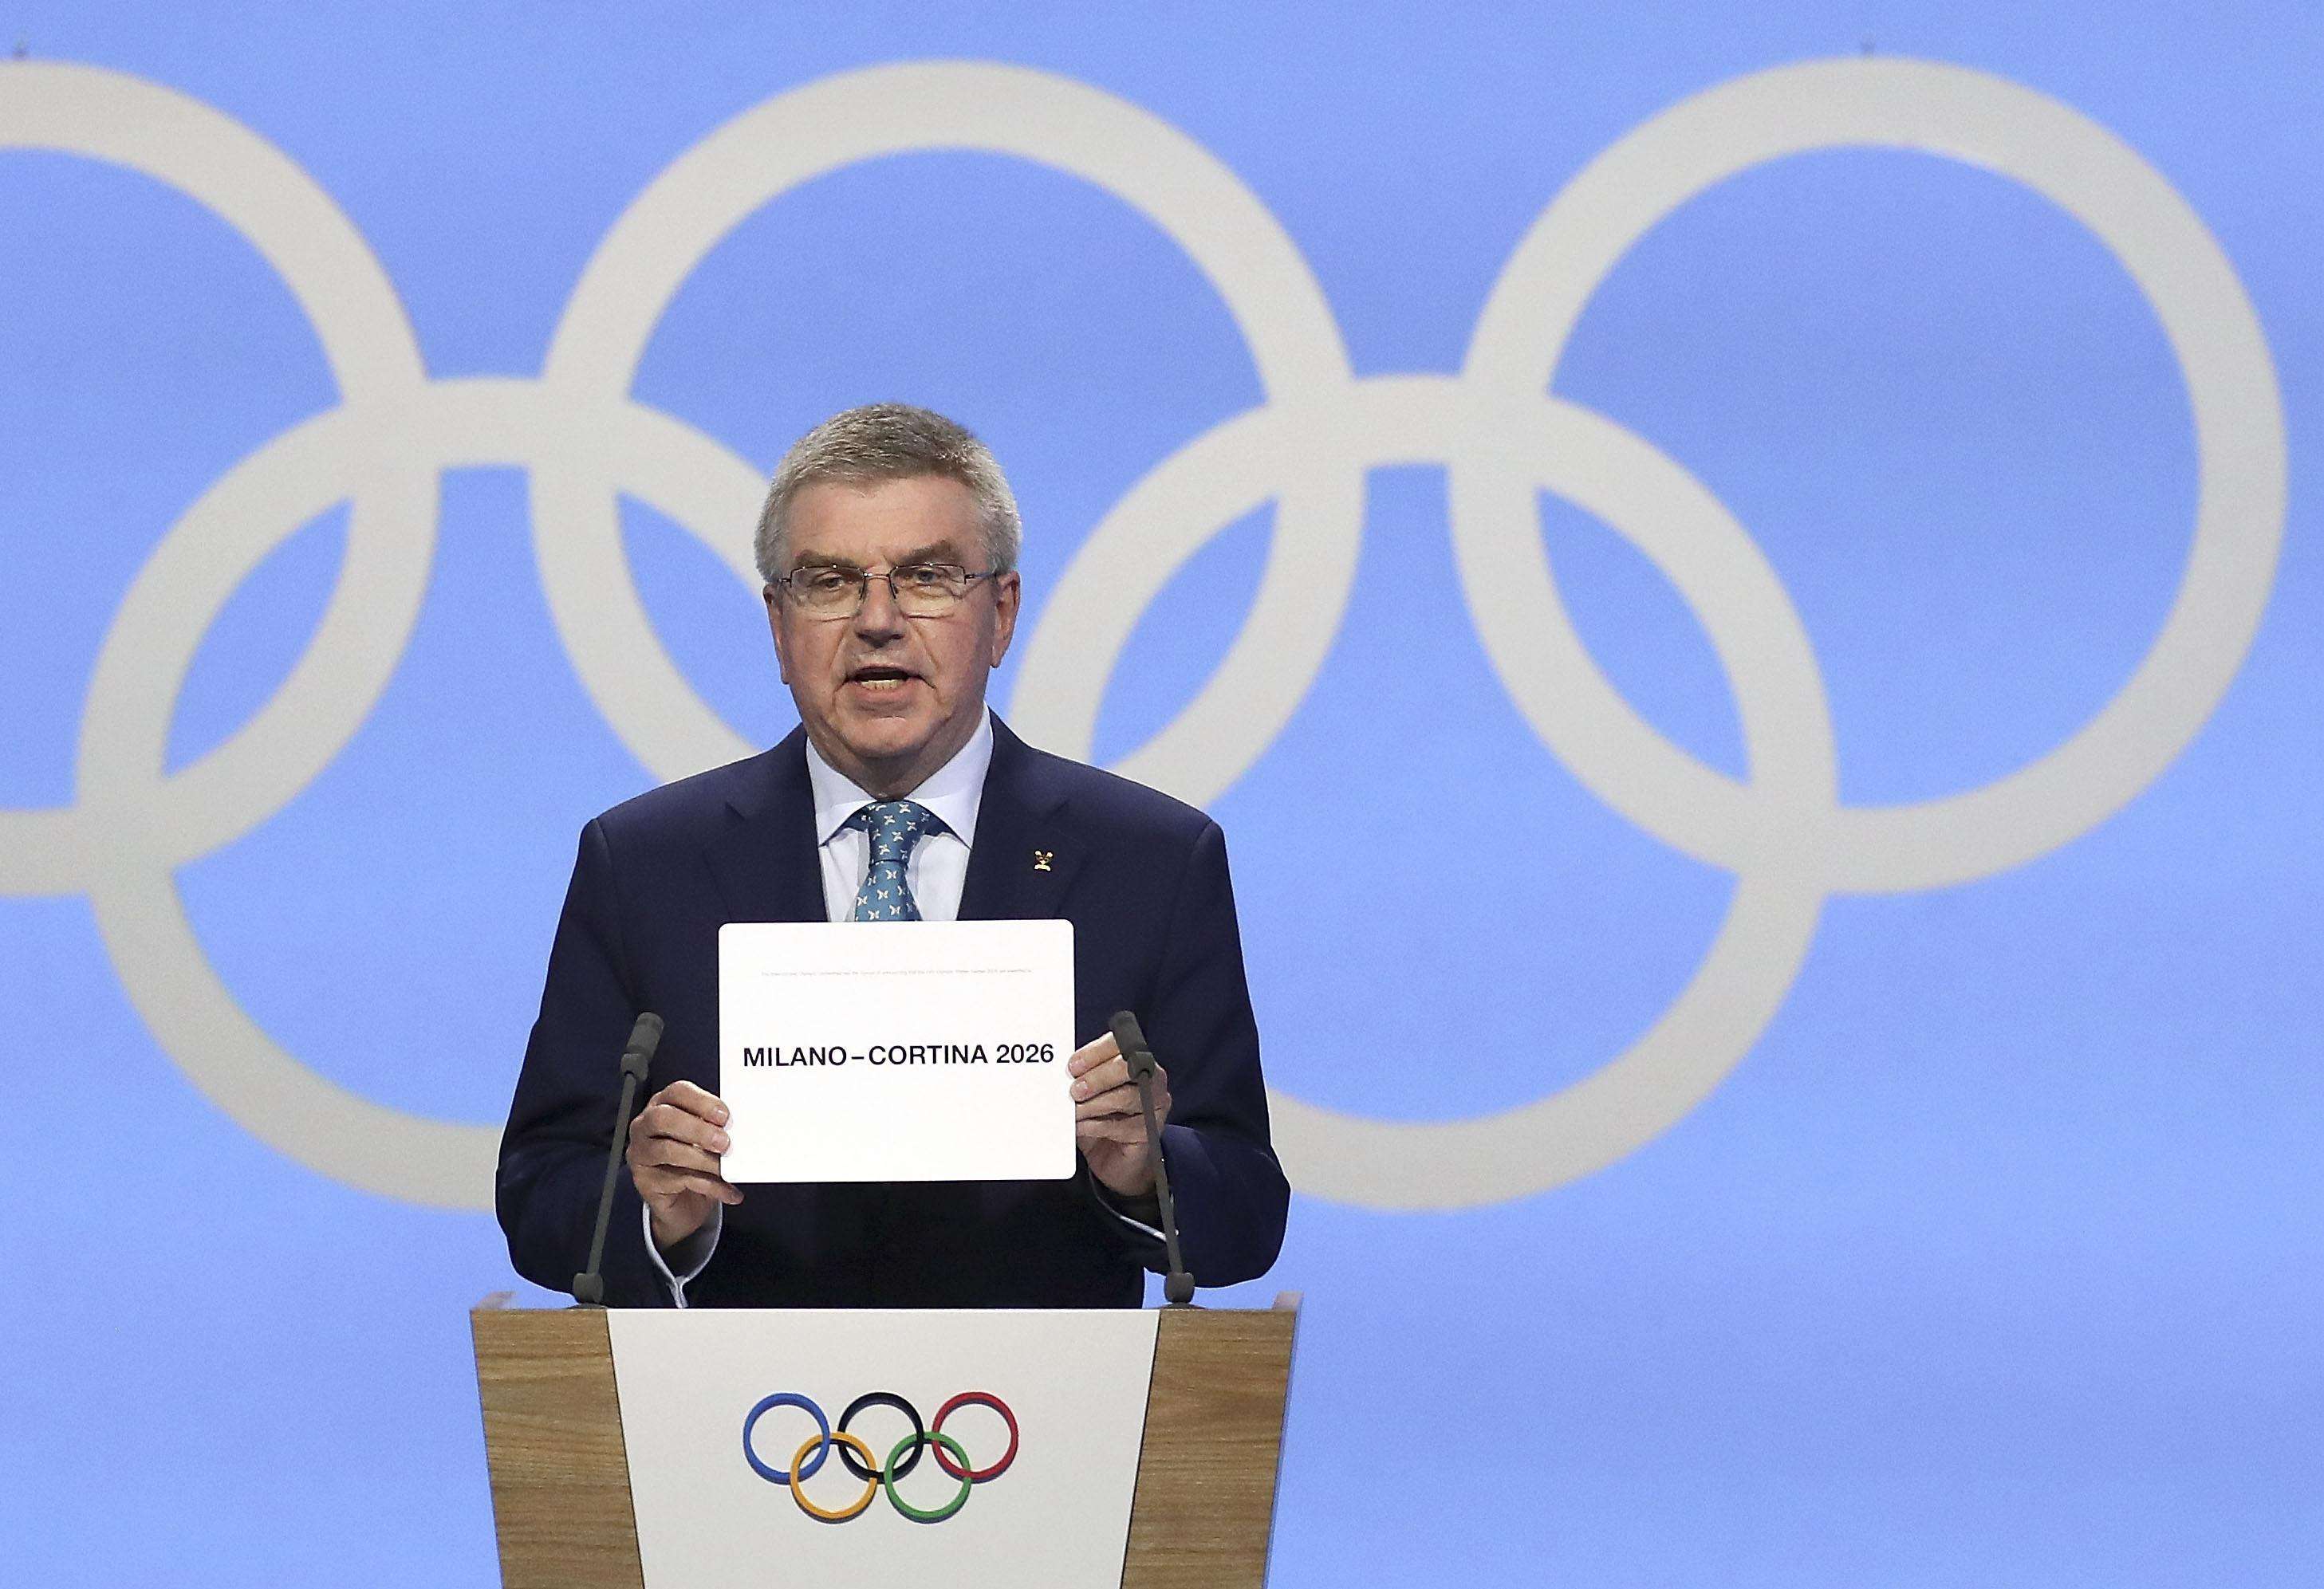 The host city of the 2026 Winter Olympics was announced. Milan, Italy, Cortina Danpezo won the right to host the 2026 Winter Olympics.